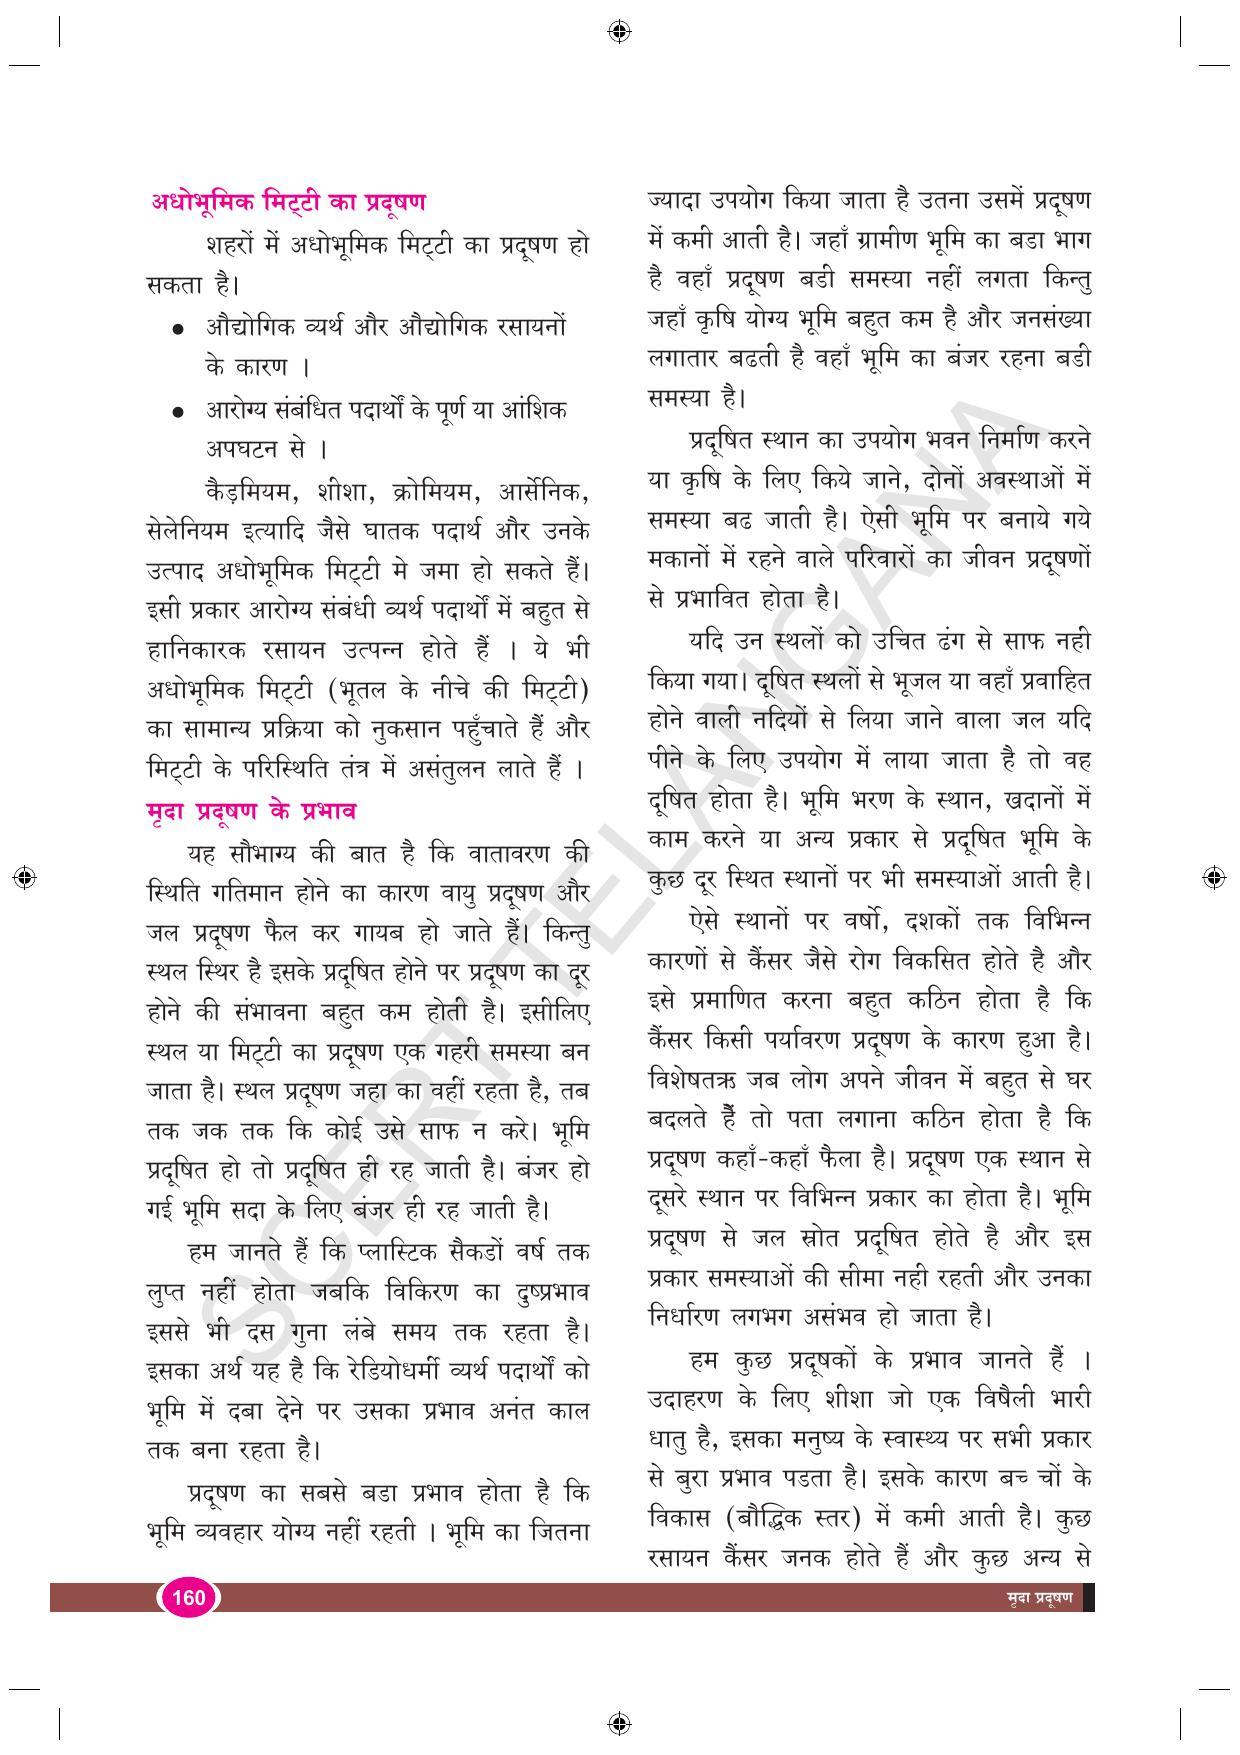 TS SCERT Class 9 Biological Science (Hindi Medium) Text Book - Page 172